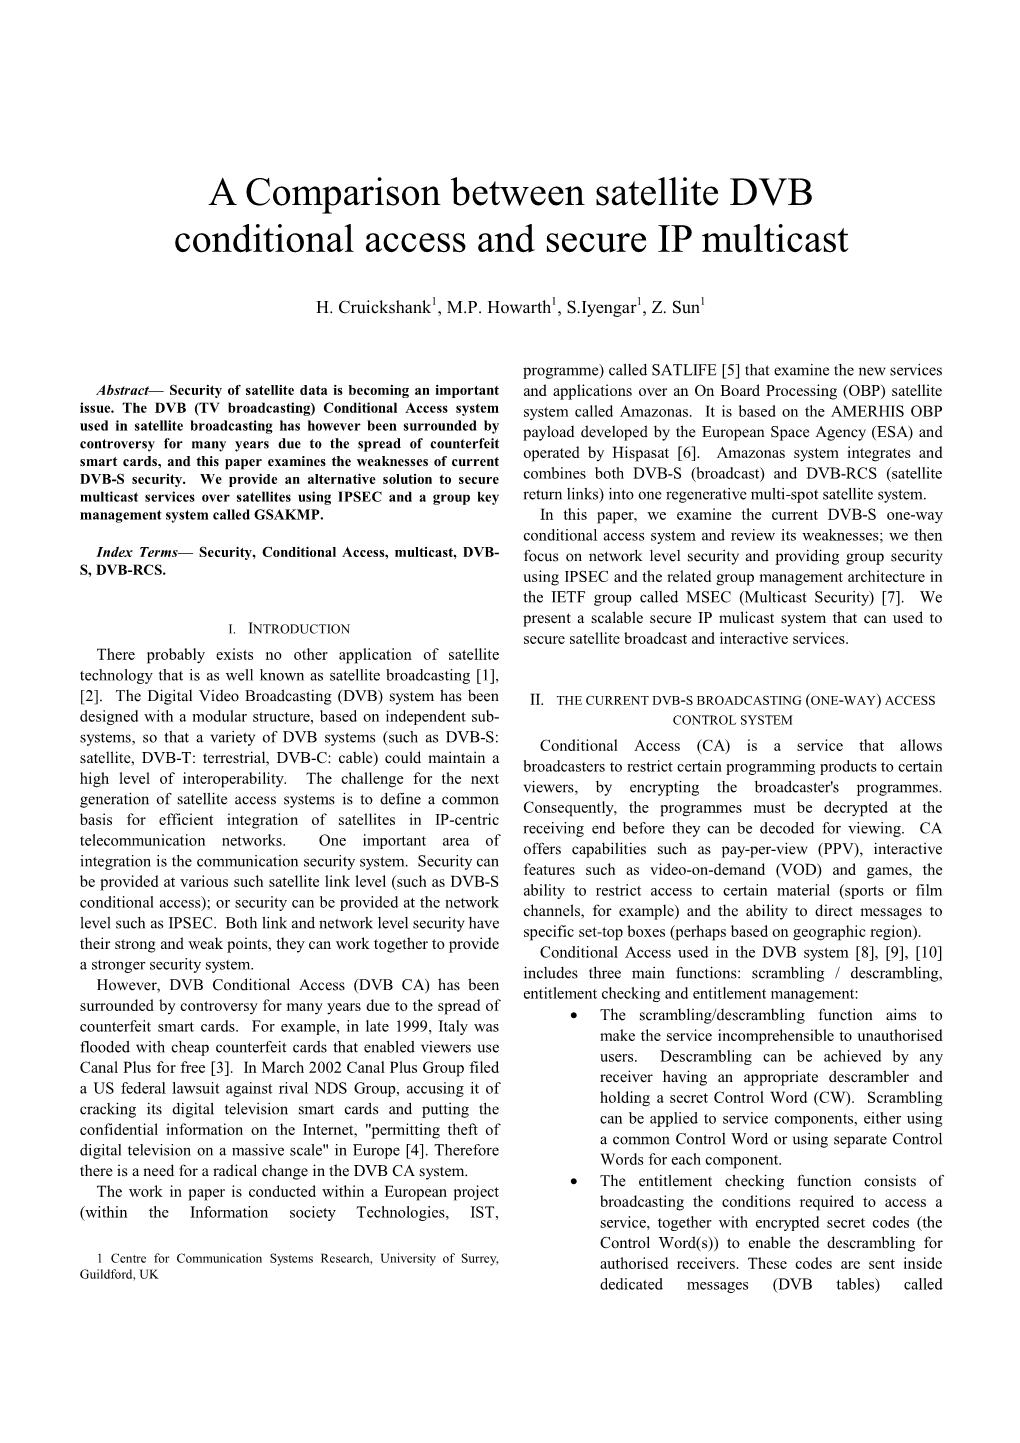 A Comparison Between Satellite DVB Conditional Access and Secure IP Multicast